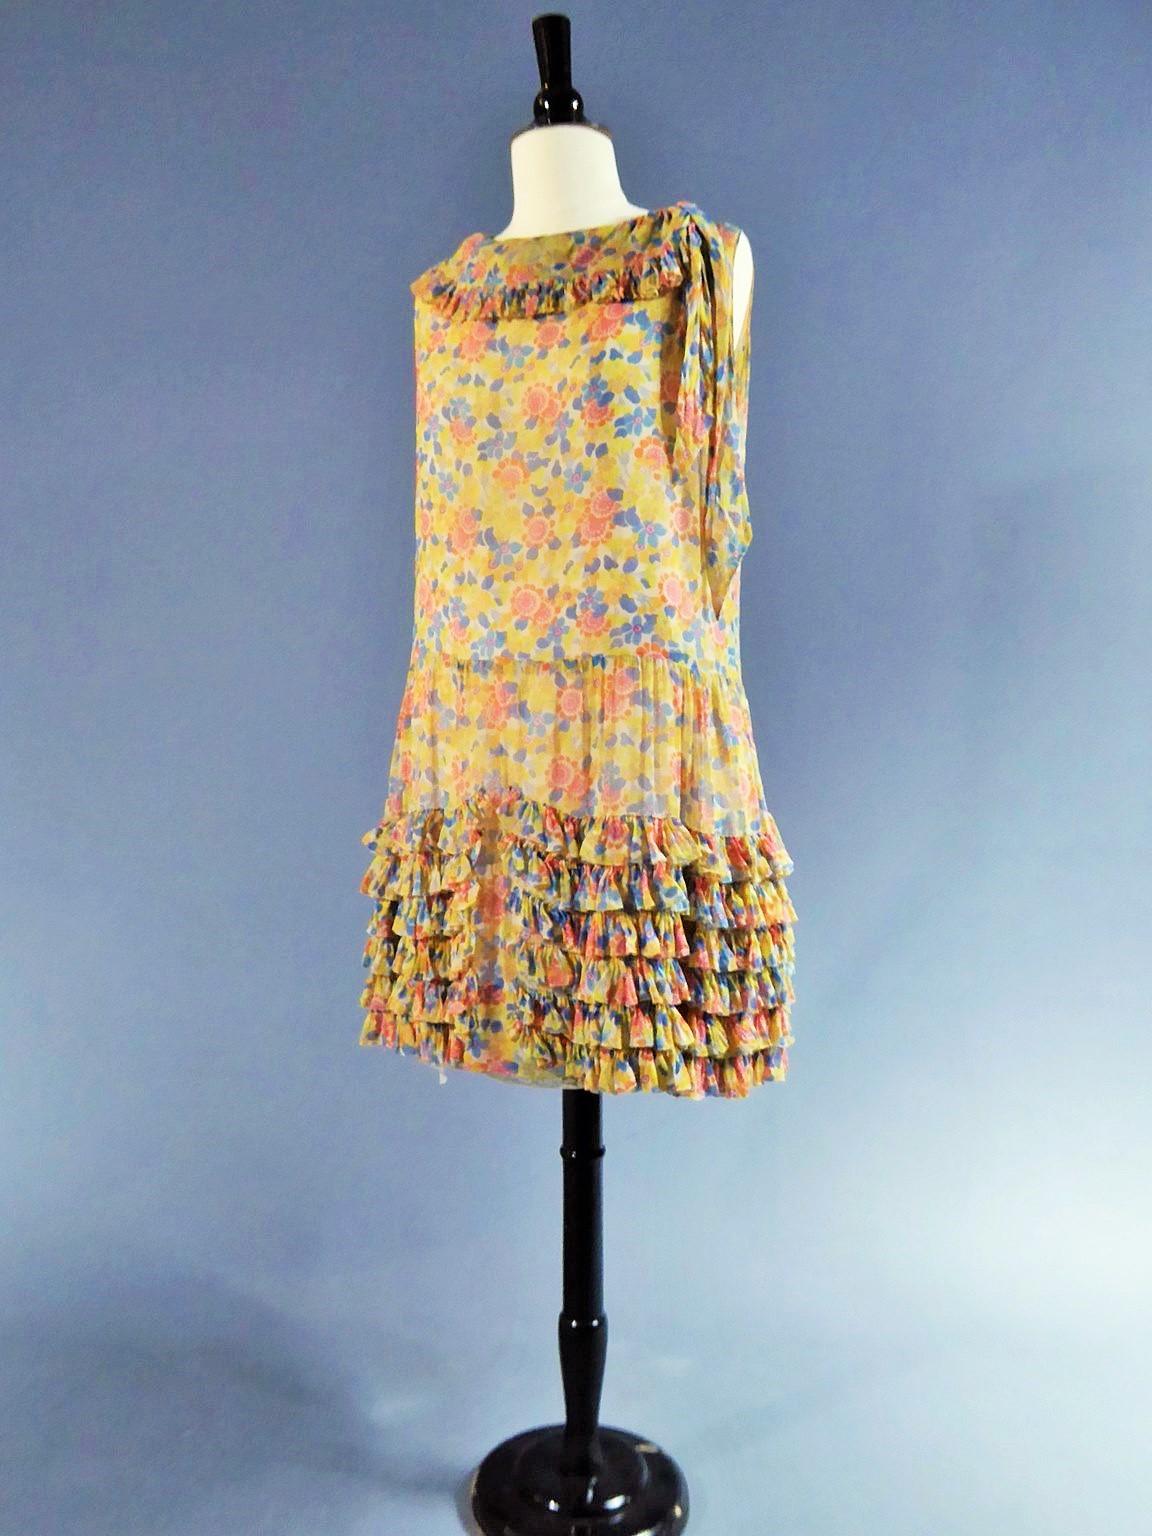 A French Callot Soeurs Couture Summer dress - Art Deco Period Circa 1925 For Sale 6